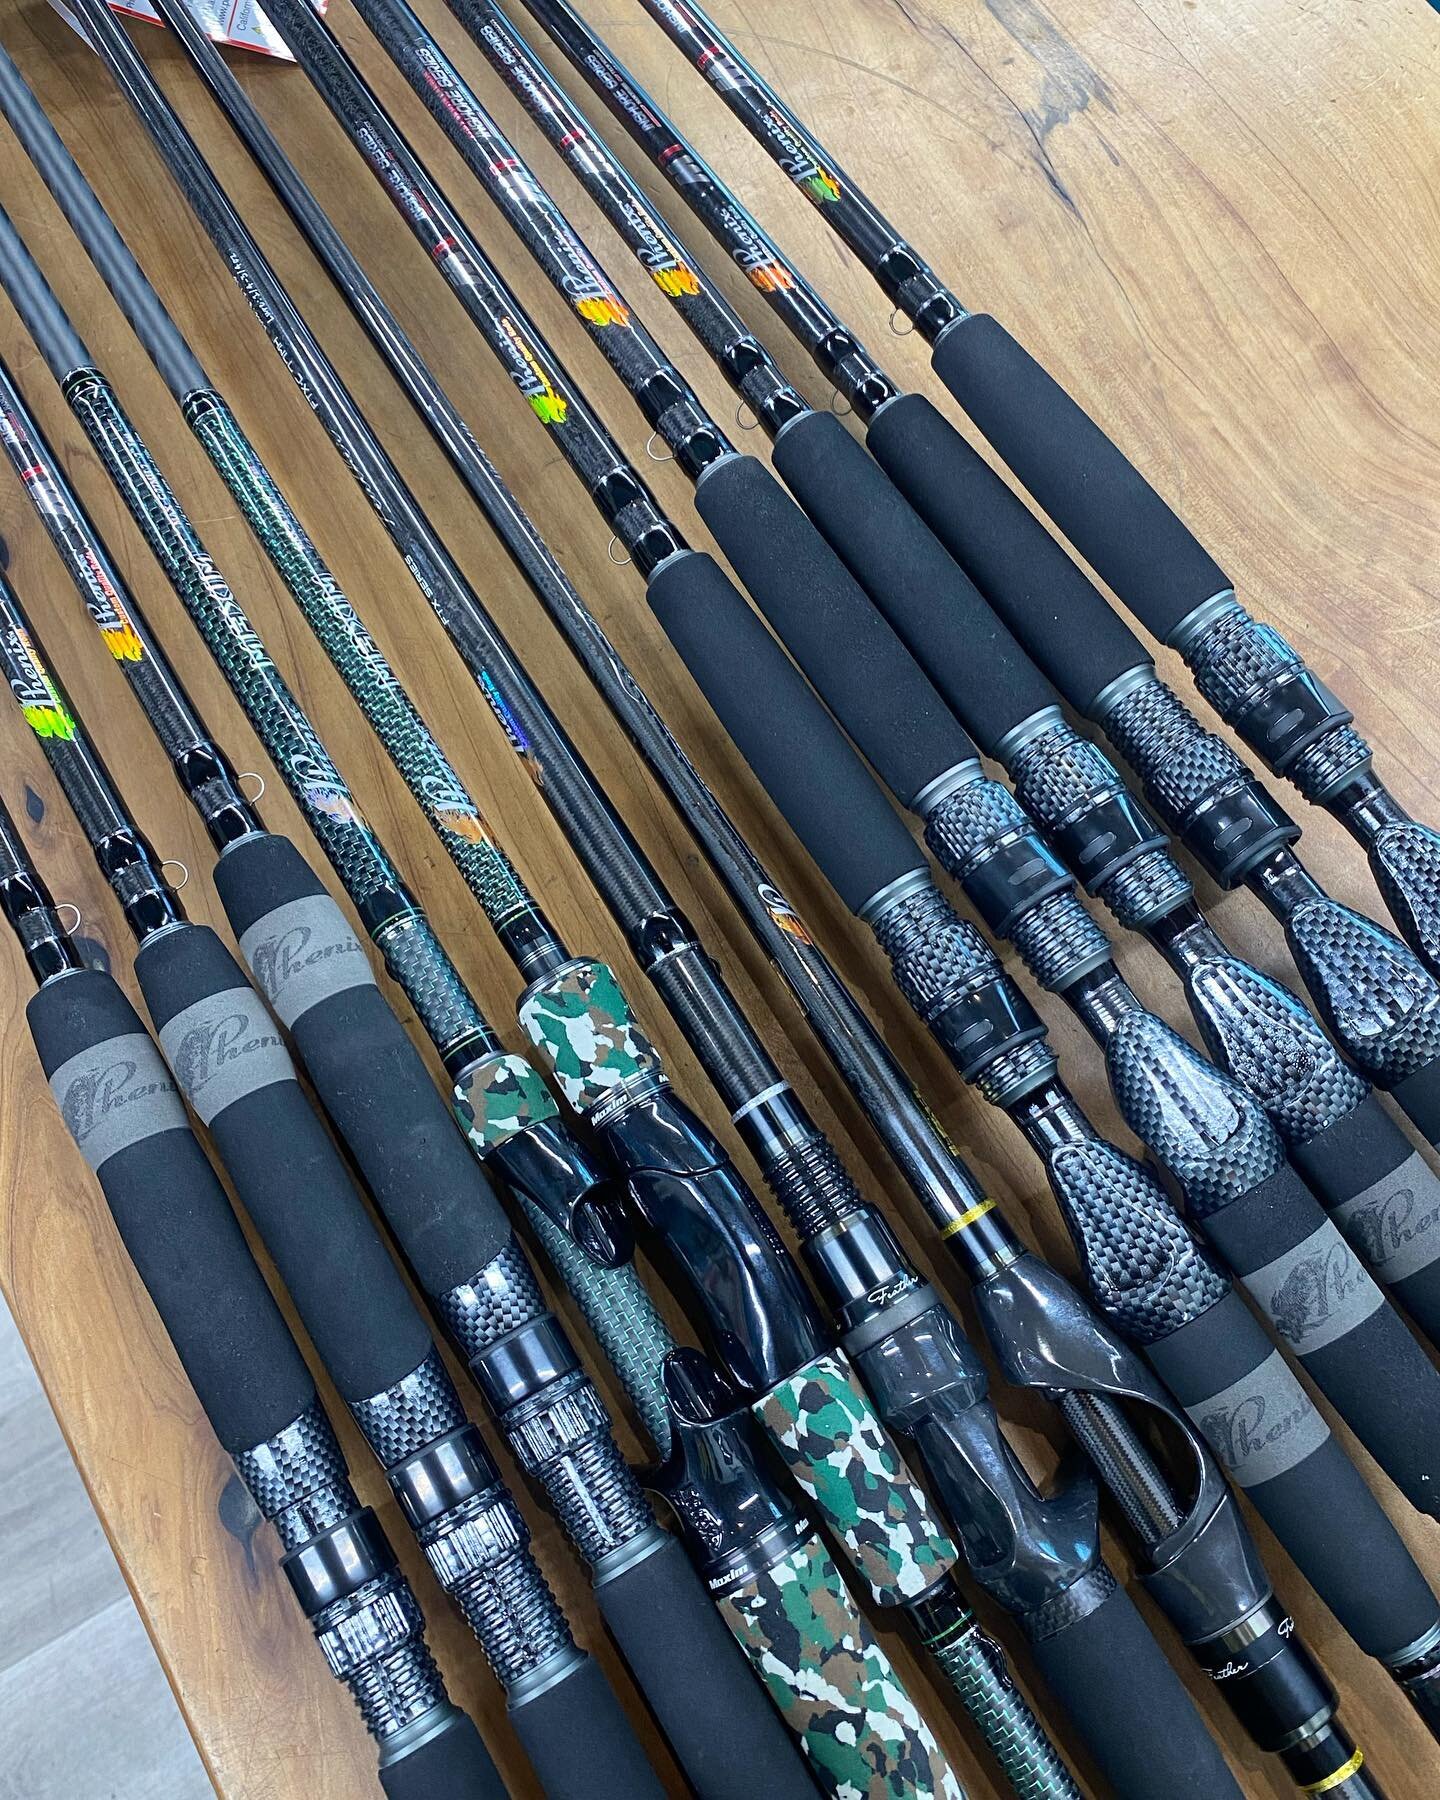 New batch of @phenixrods on the rack! 

M1, Feather, Maxim, Abyss, Axis in conventional and spinning!